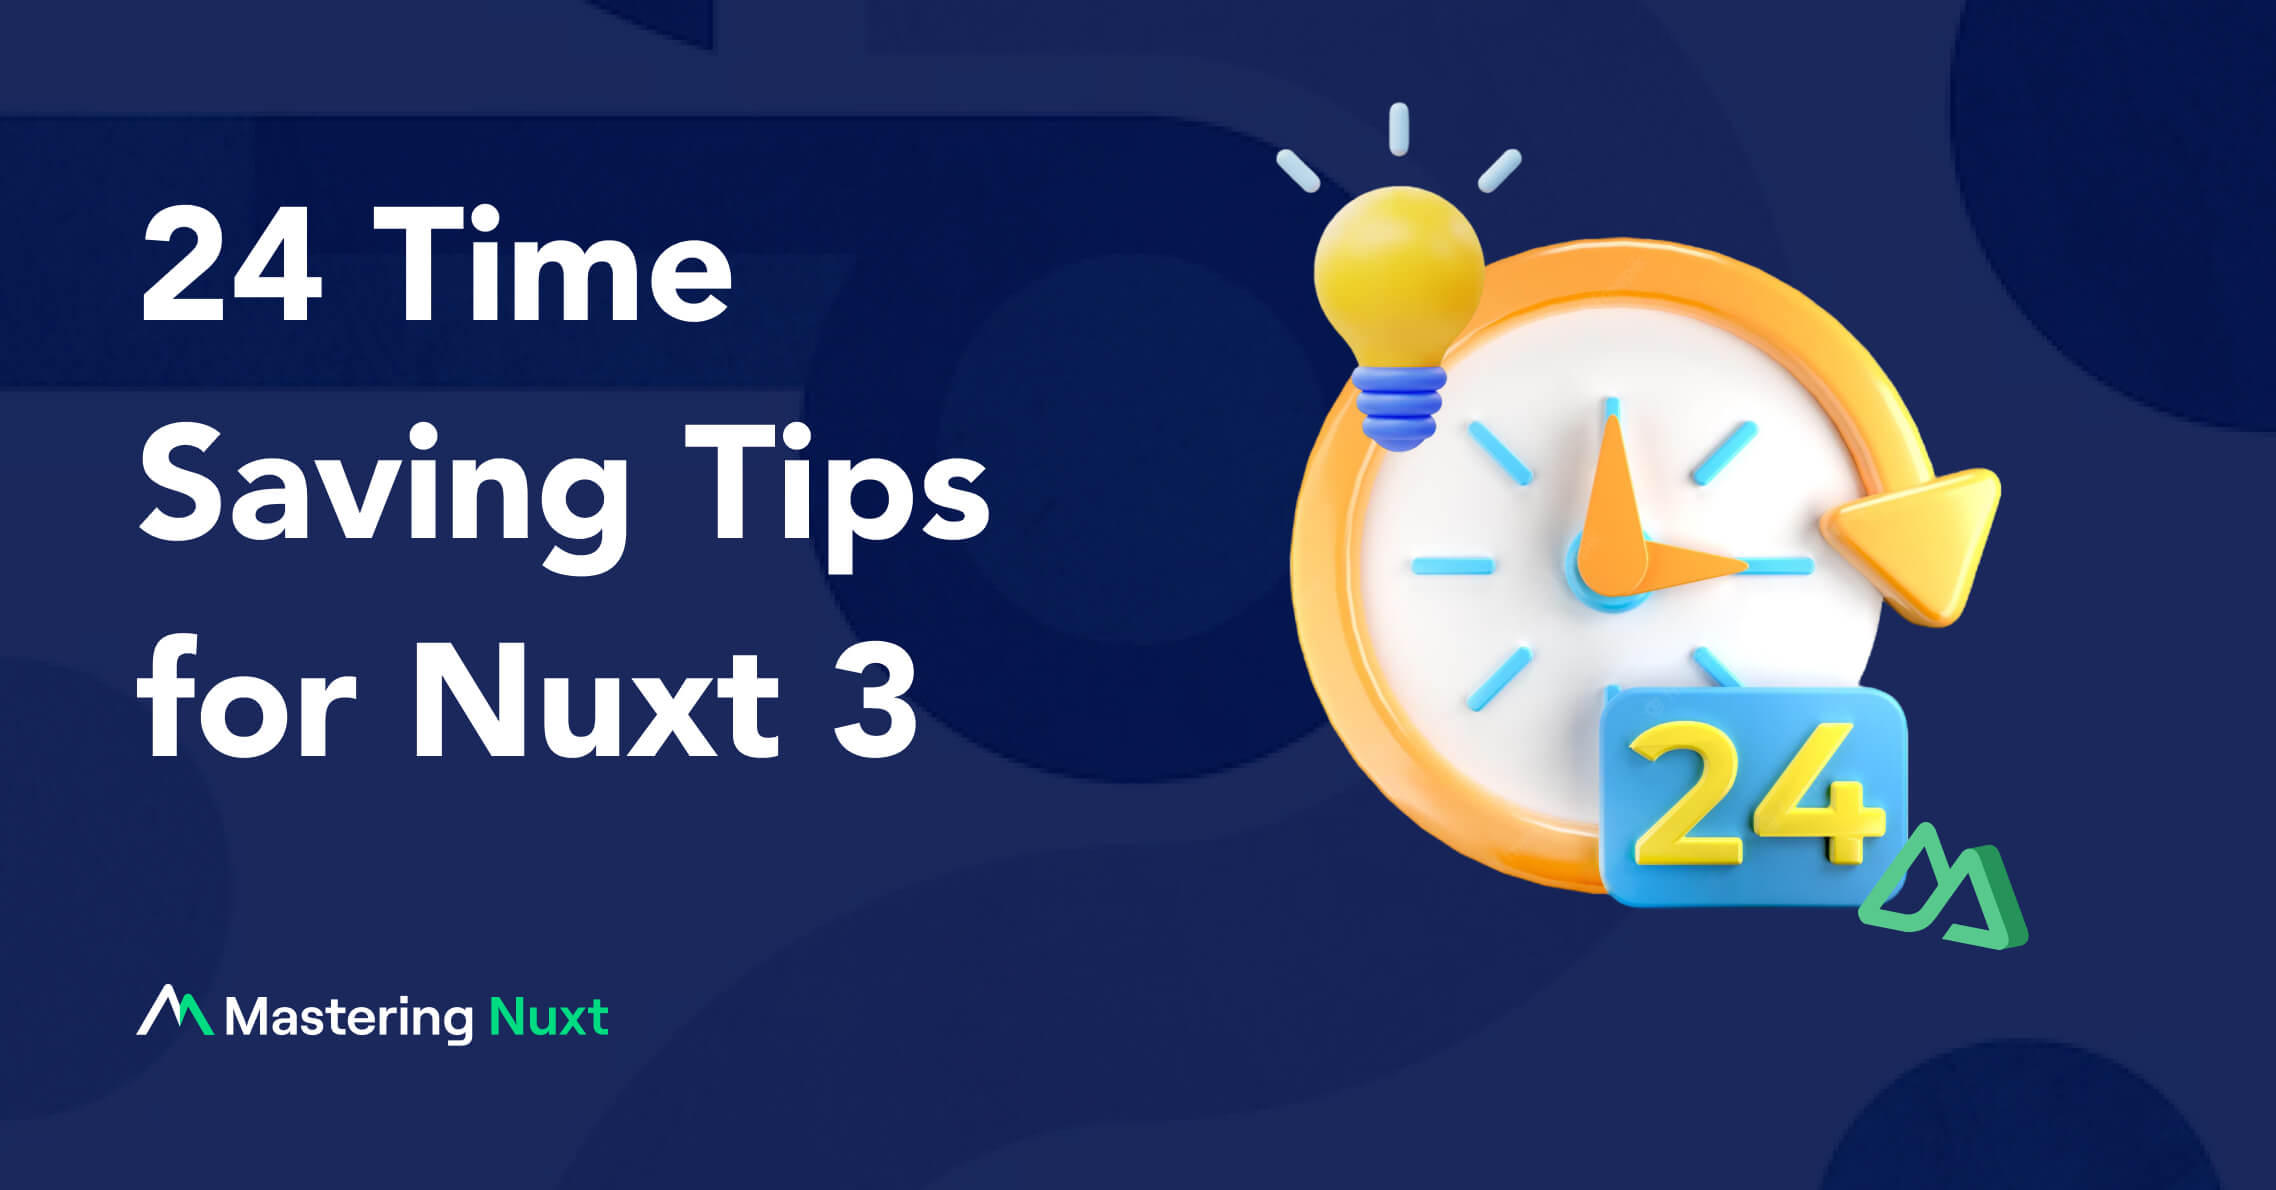 Cover Image for External Article Titled 24 Time Saving Tips for Nuxt 3